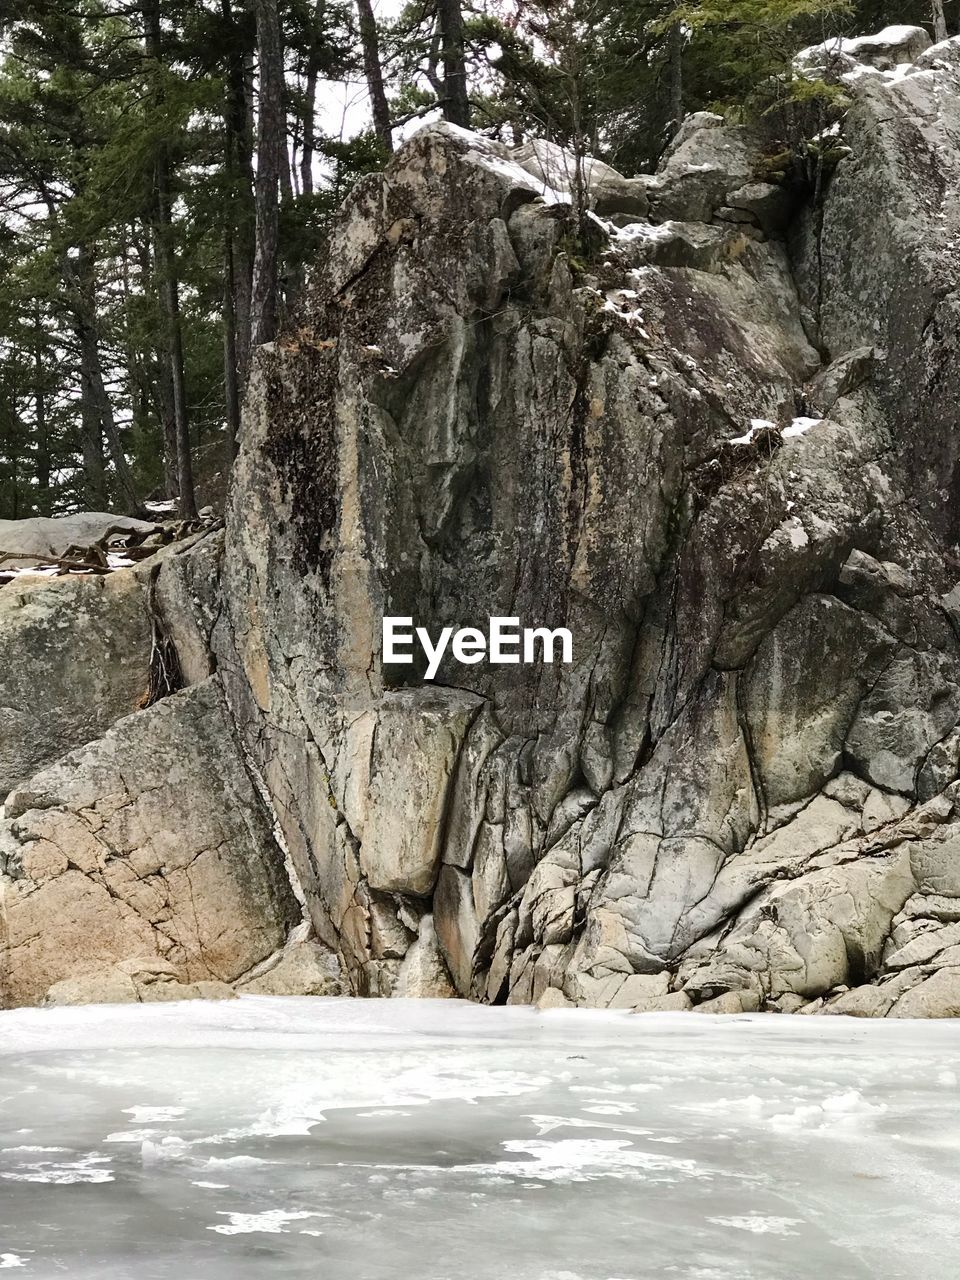 SCENIC VIEW OF ROCK FORMATION ON SNOW